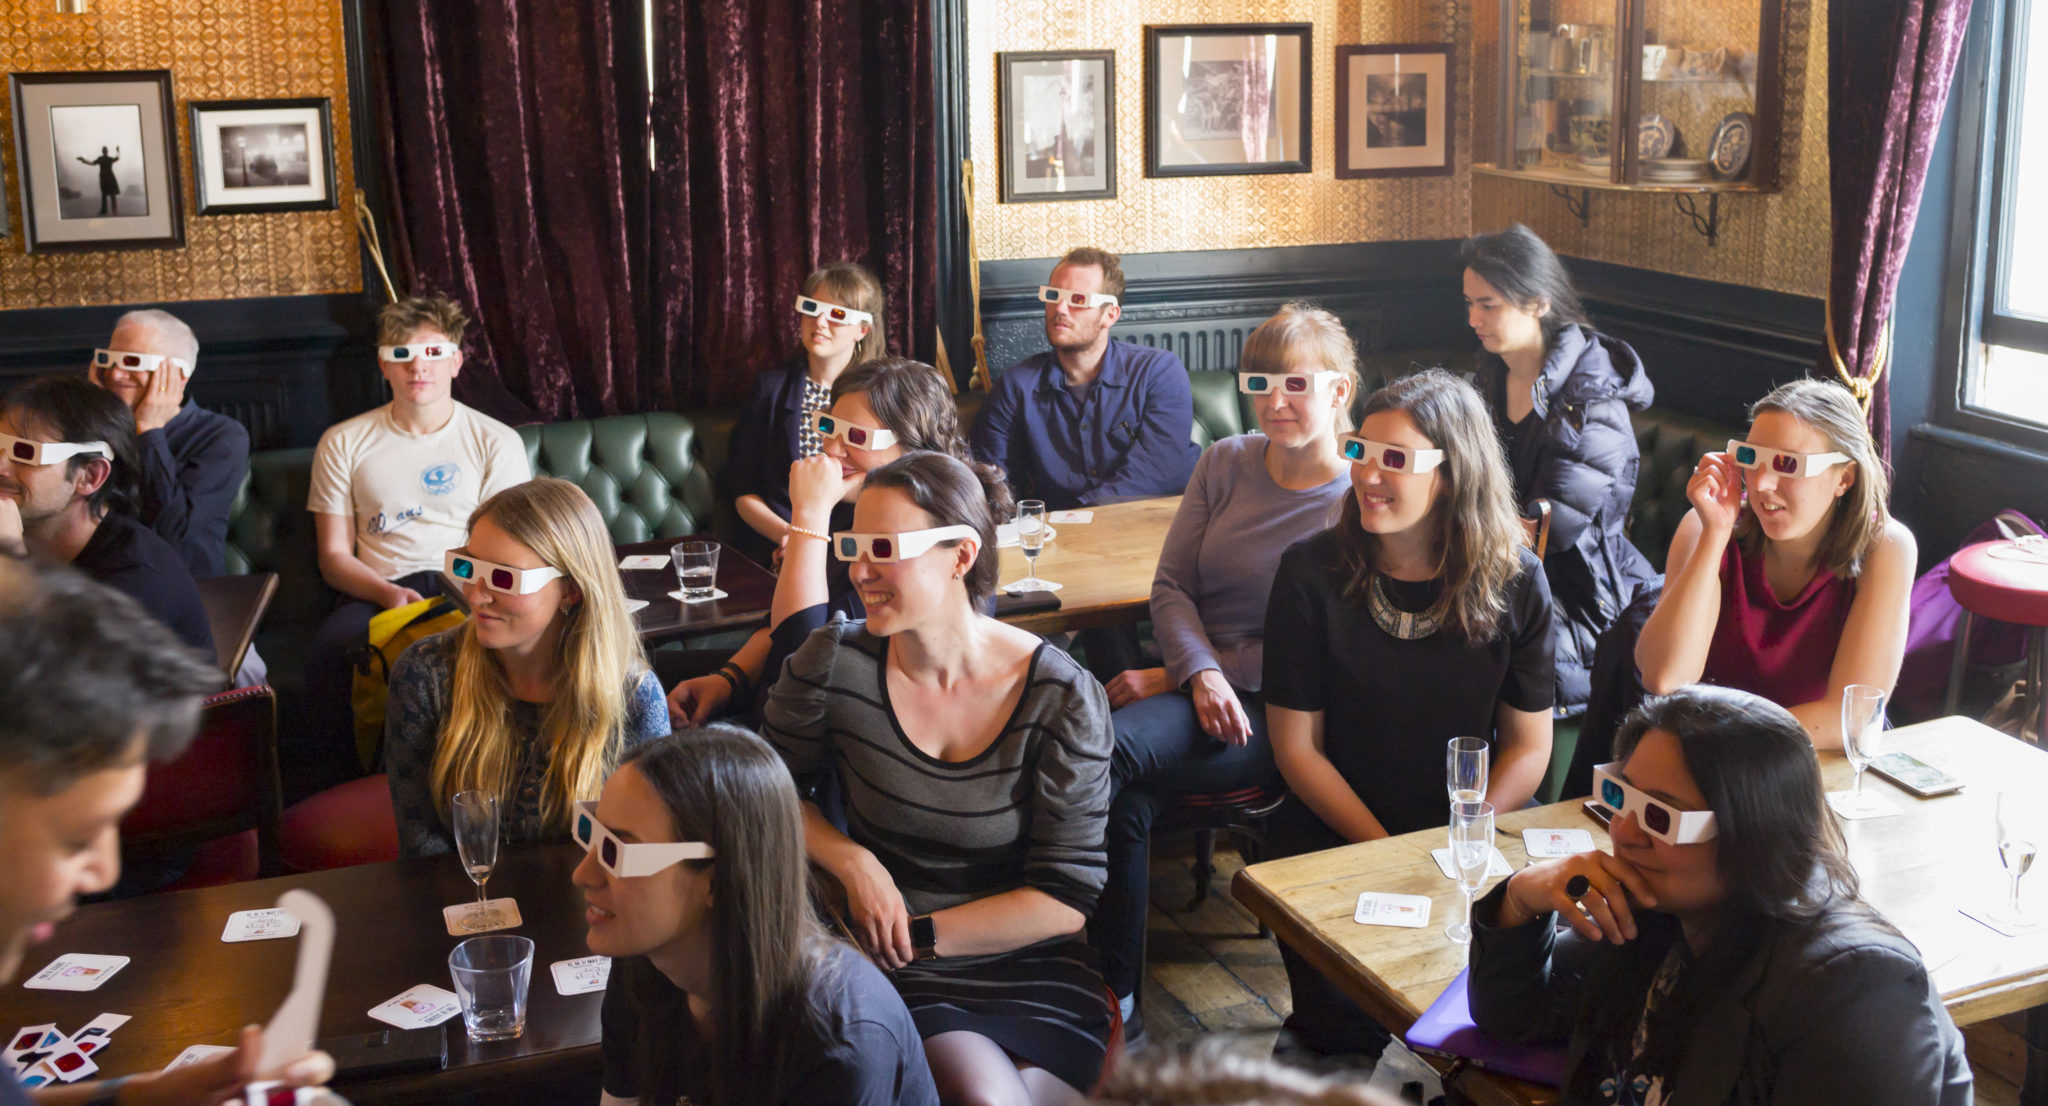 Science Communication: Crowd with 3D glasses in bar during Pint of Science event